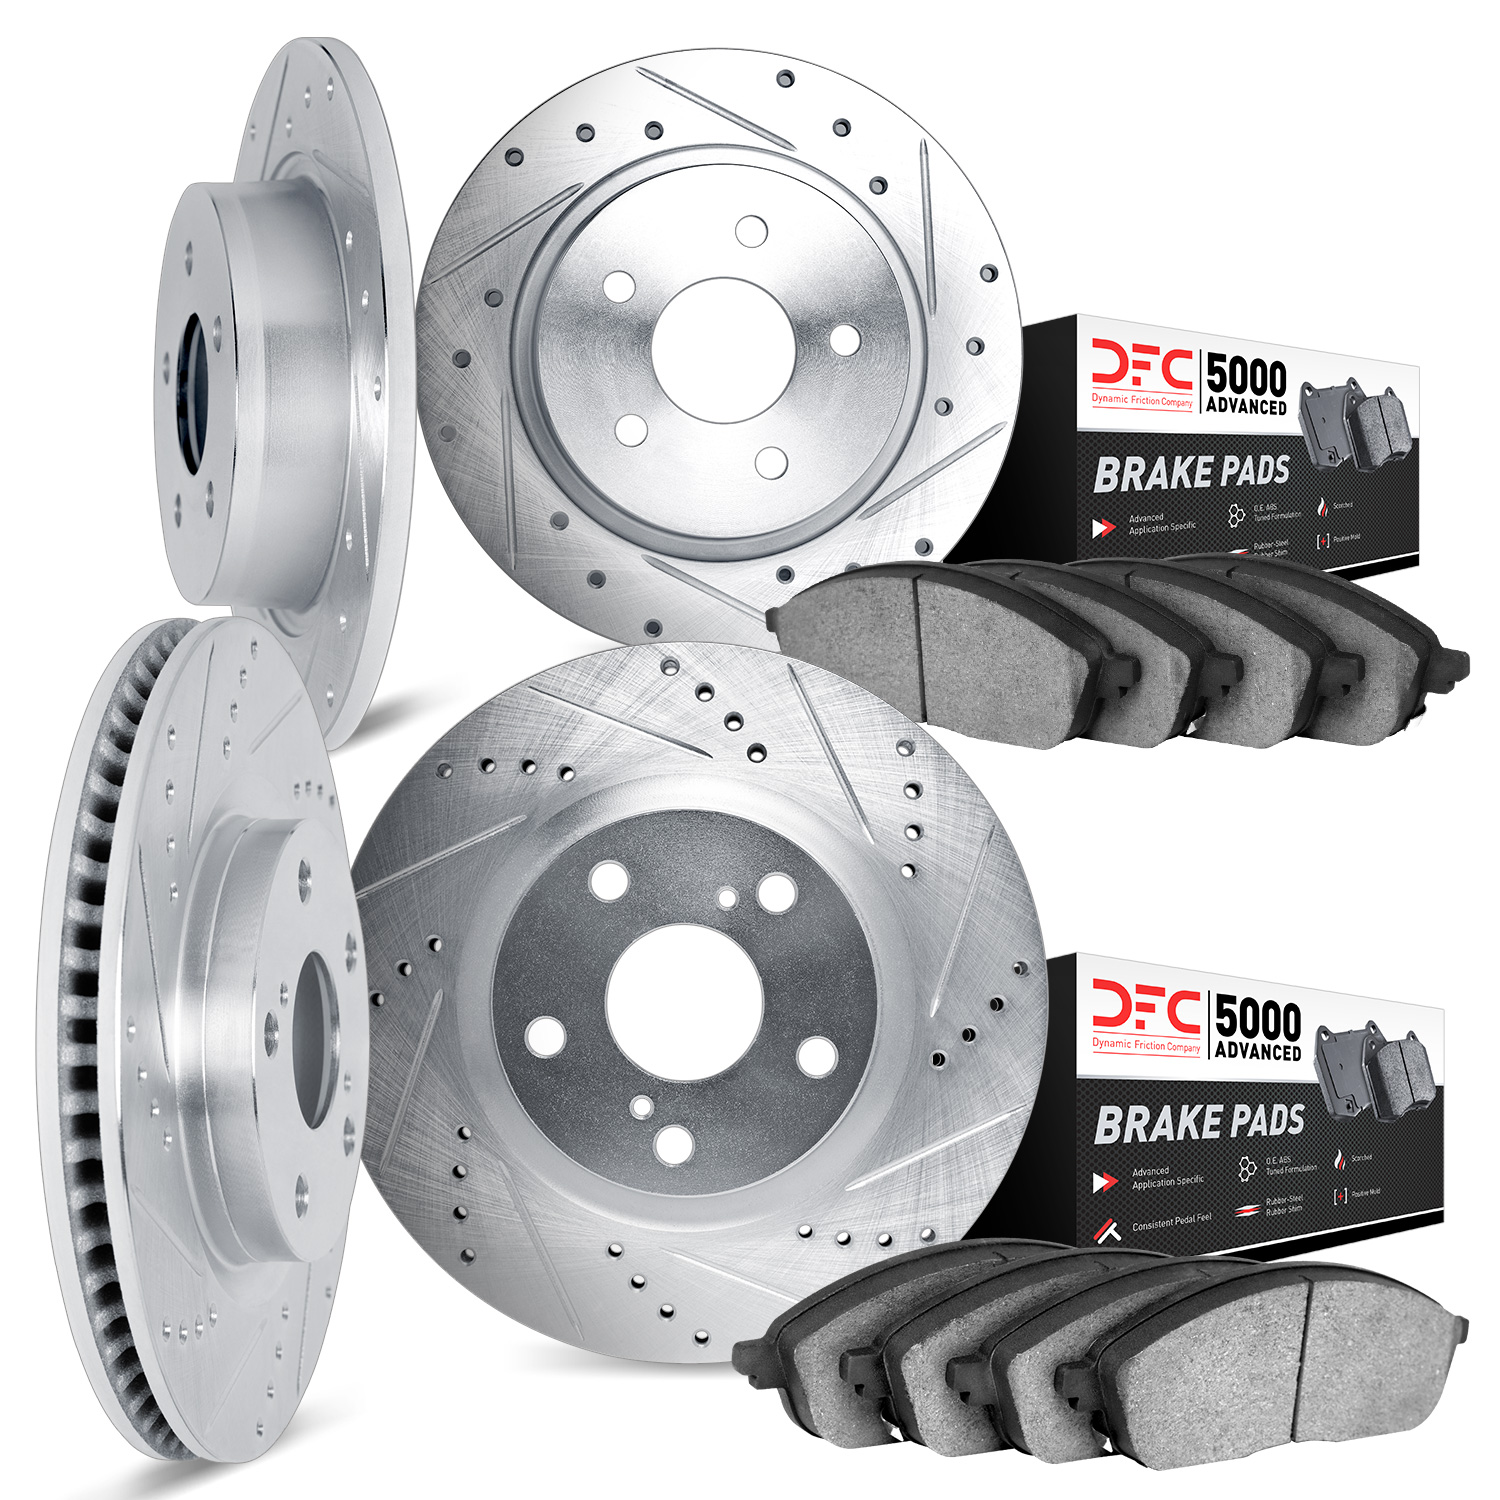 7504-76150 Drilled/Slotted Brake Rotors w/5000 Advanced Brake Pads Kit [Silver], 2004-2008 Lexus/Toyota/Scion, Position: Front a